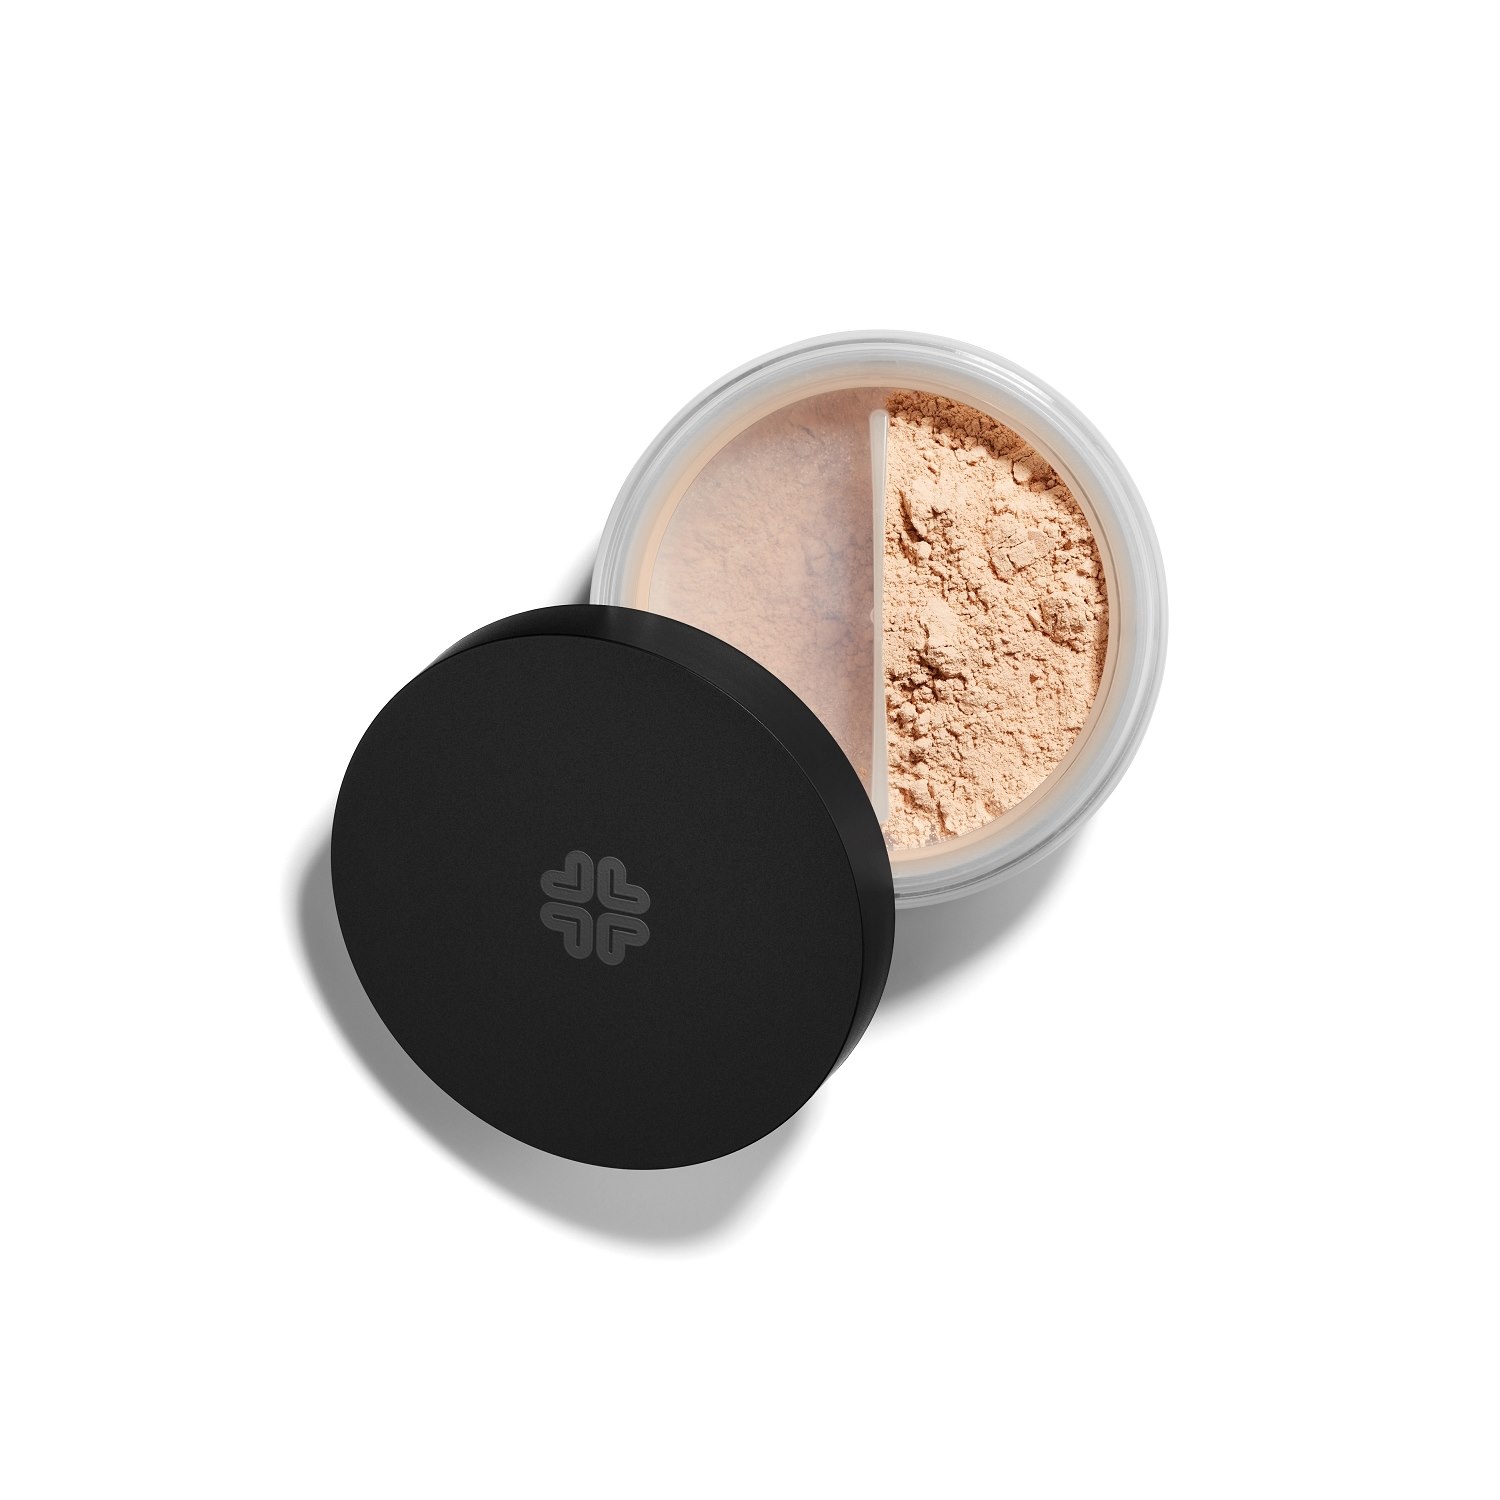 Lily Lolo Mineral Foundation SPF 15, 10 g Barely Buff